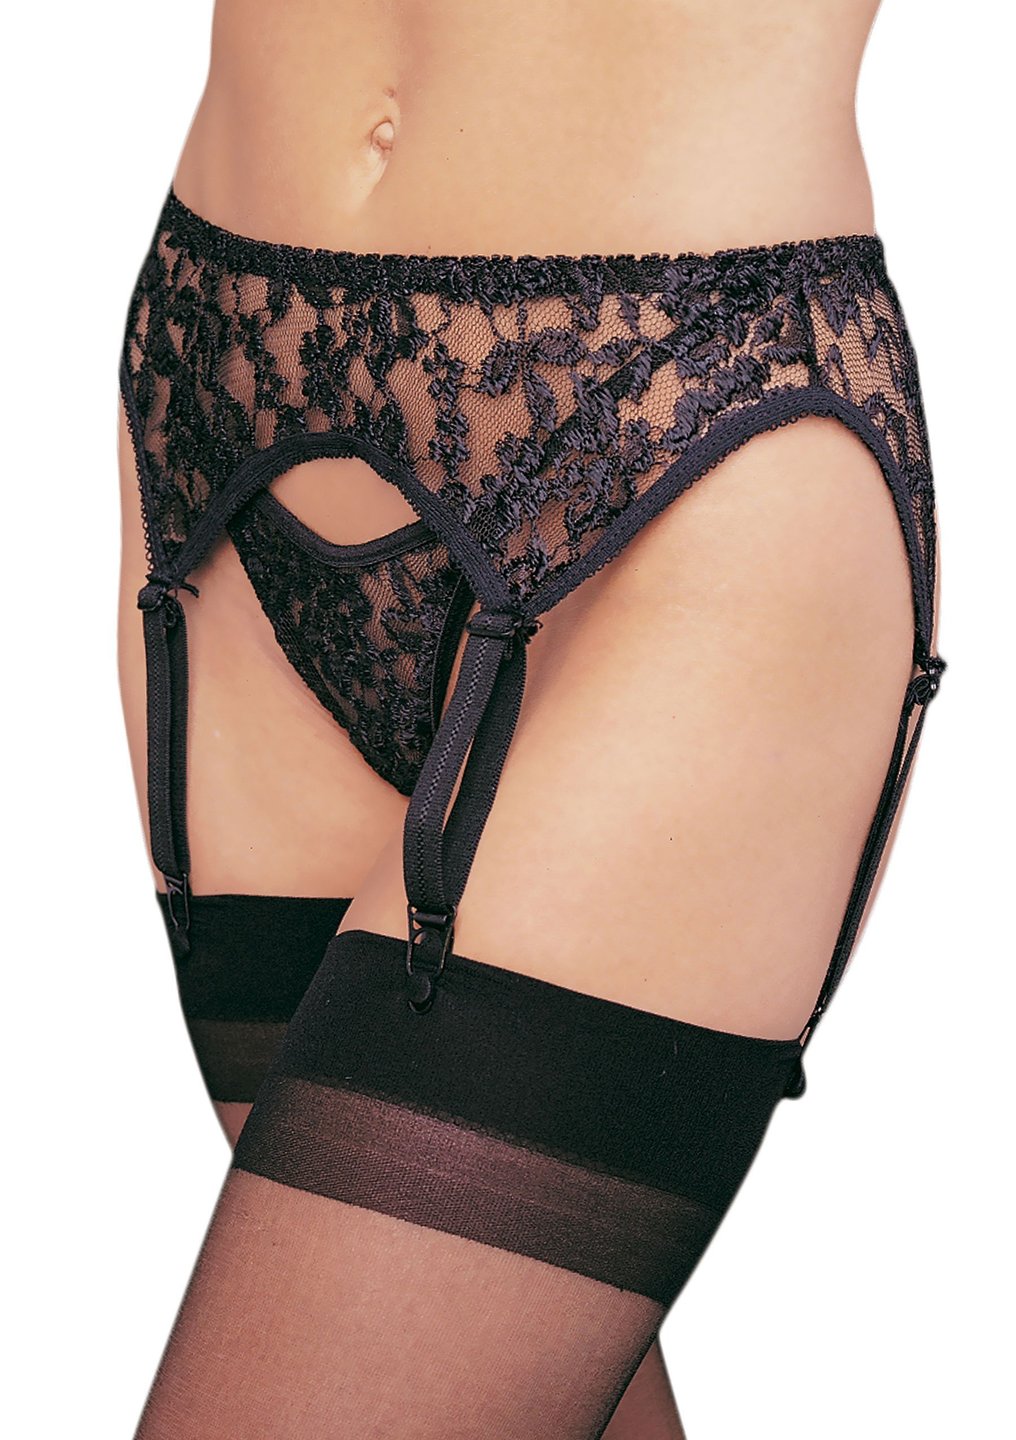 The black Lace Lolita Garterbelt With Thong.